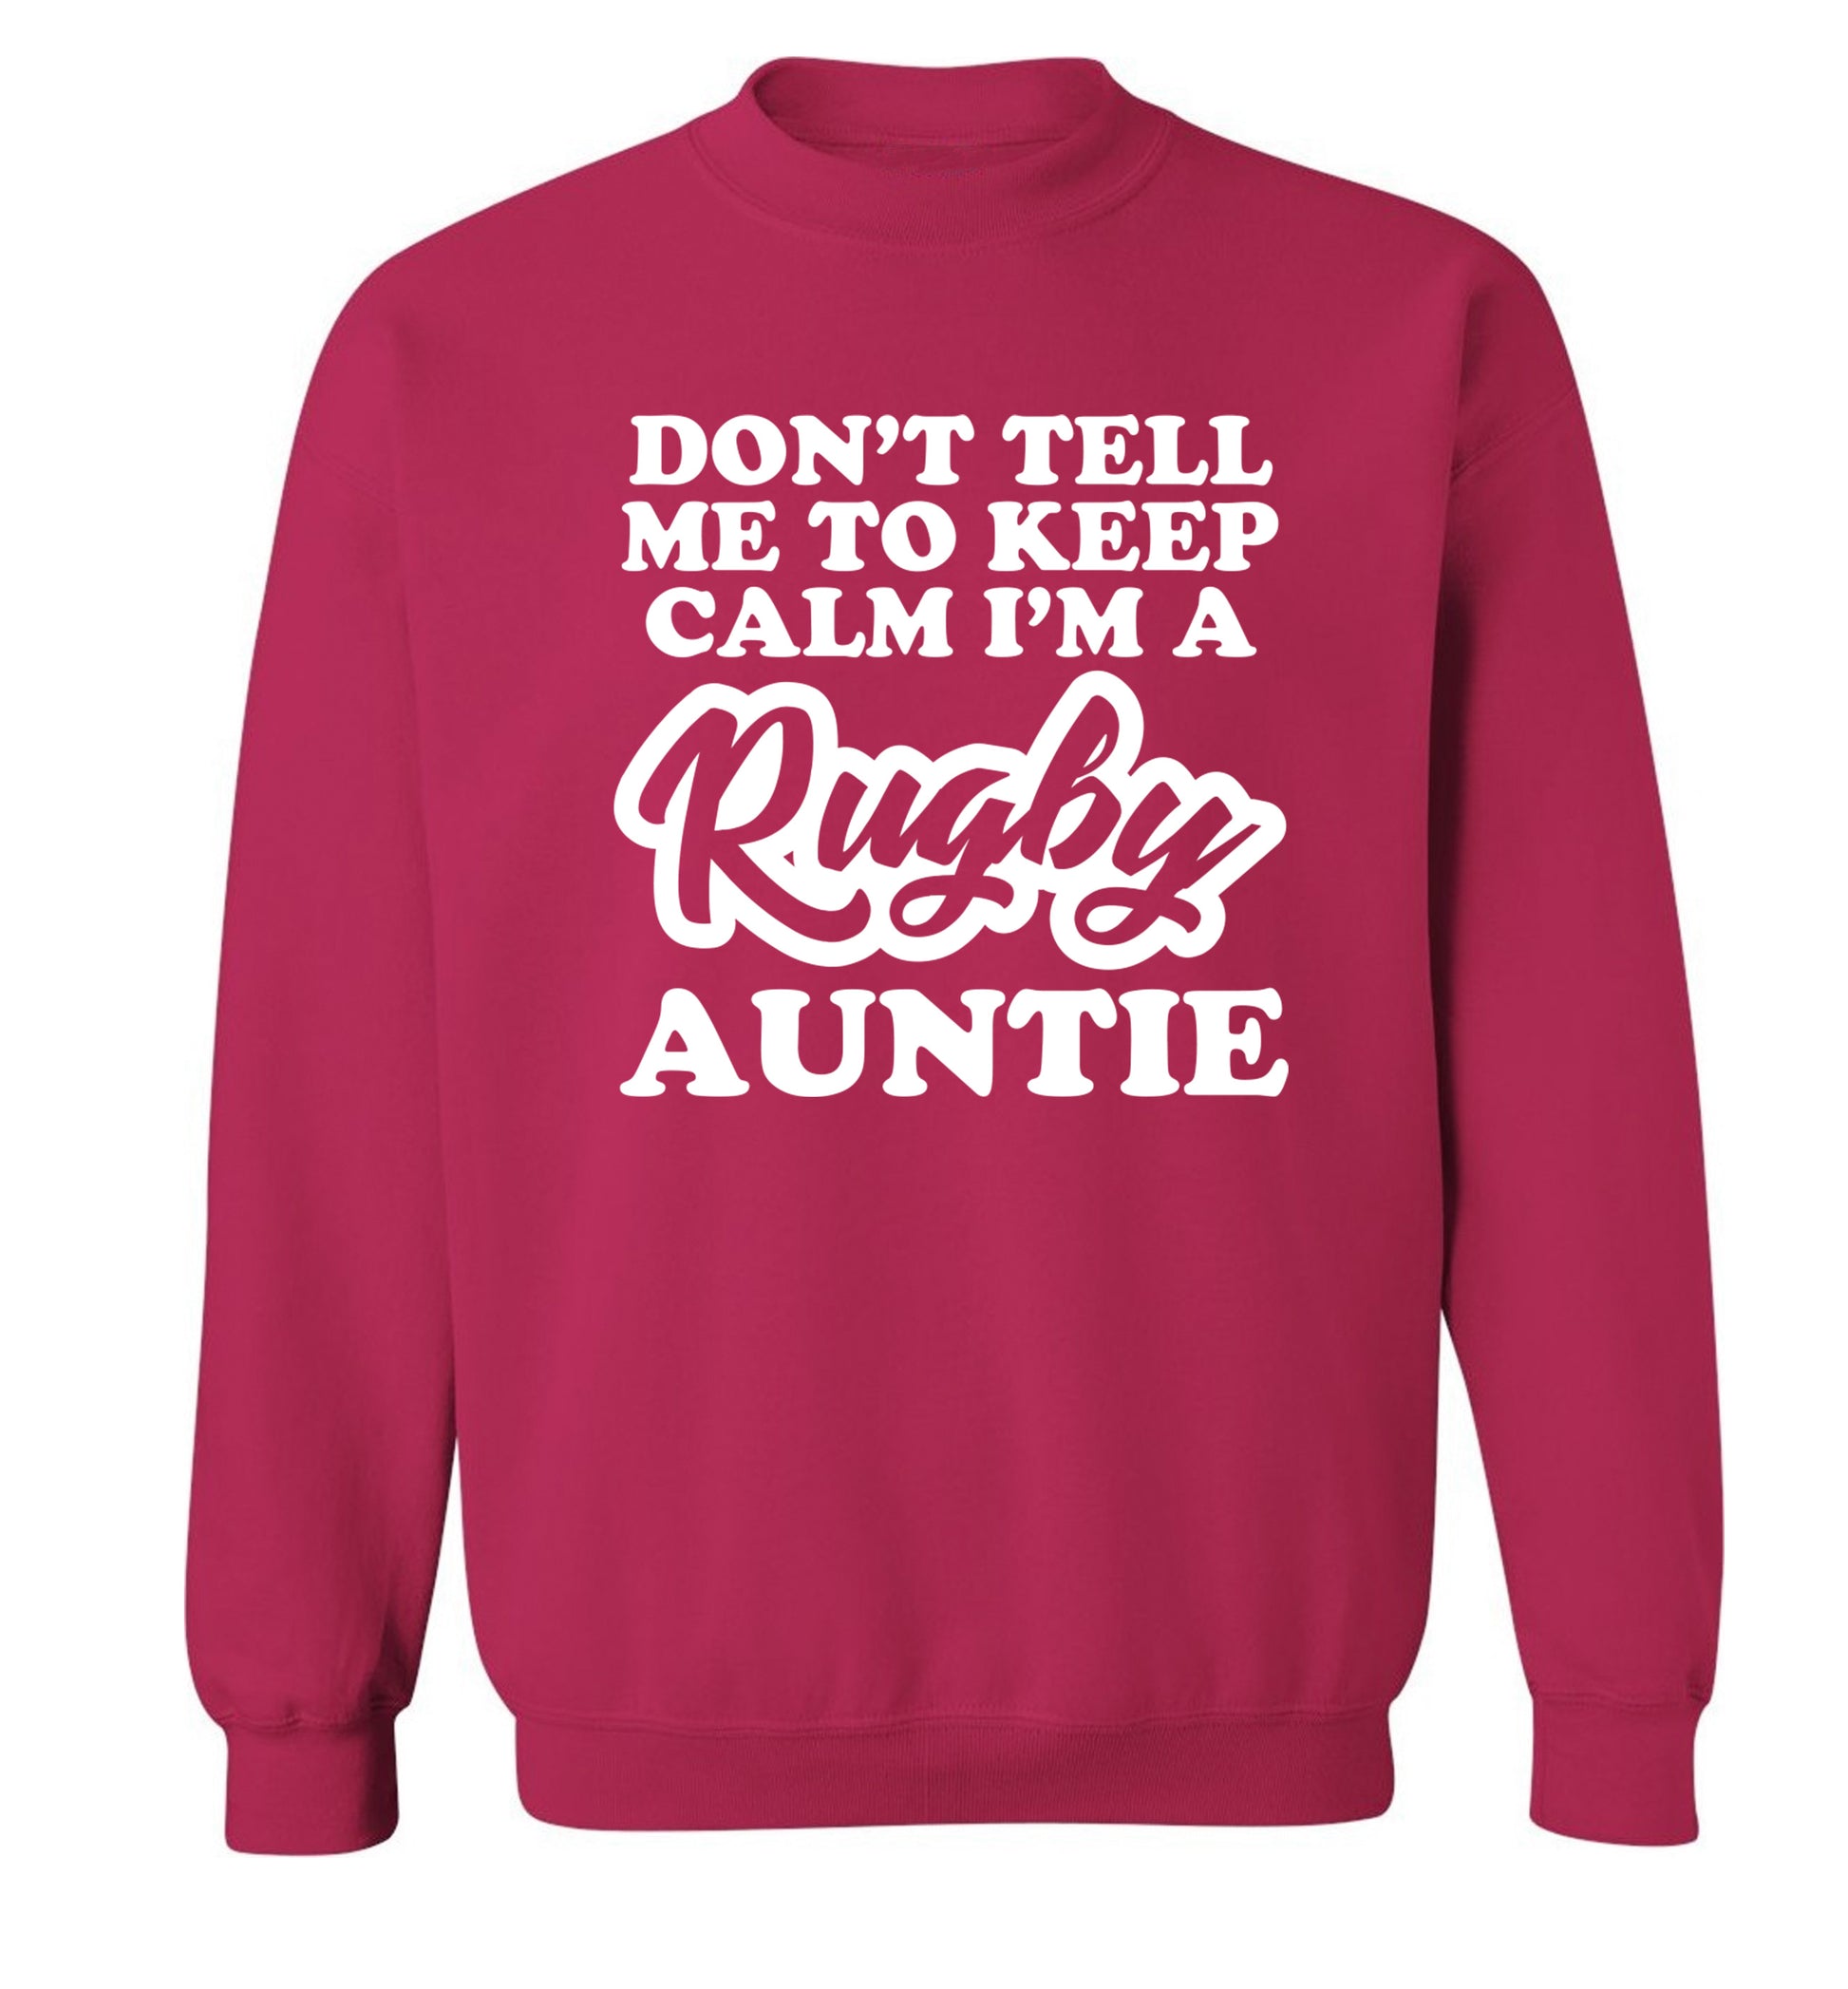 Don't tell me keep calm I'm a rugby auntie Adult's unisex pink Sweater 2XL